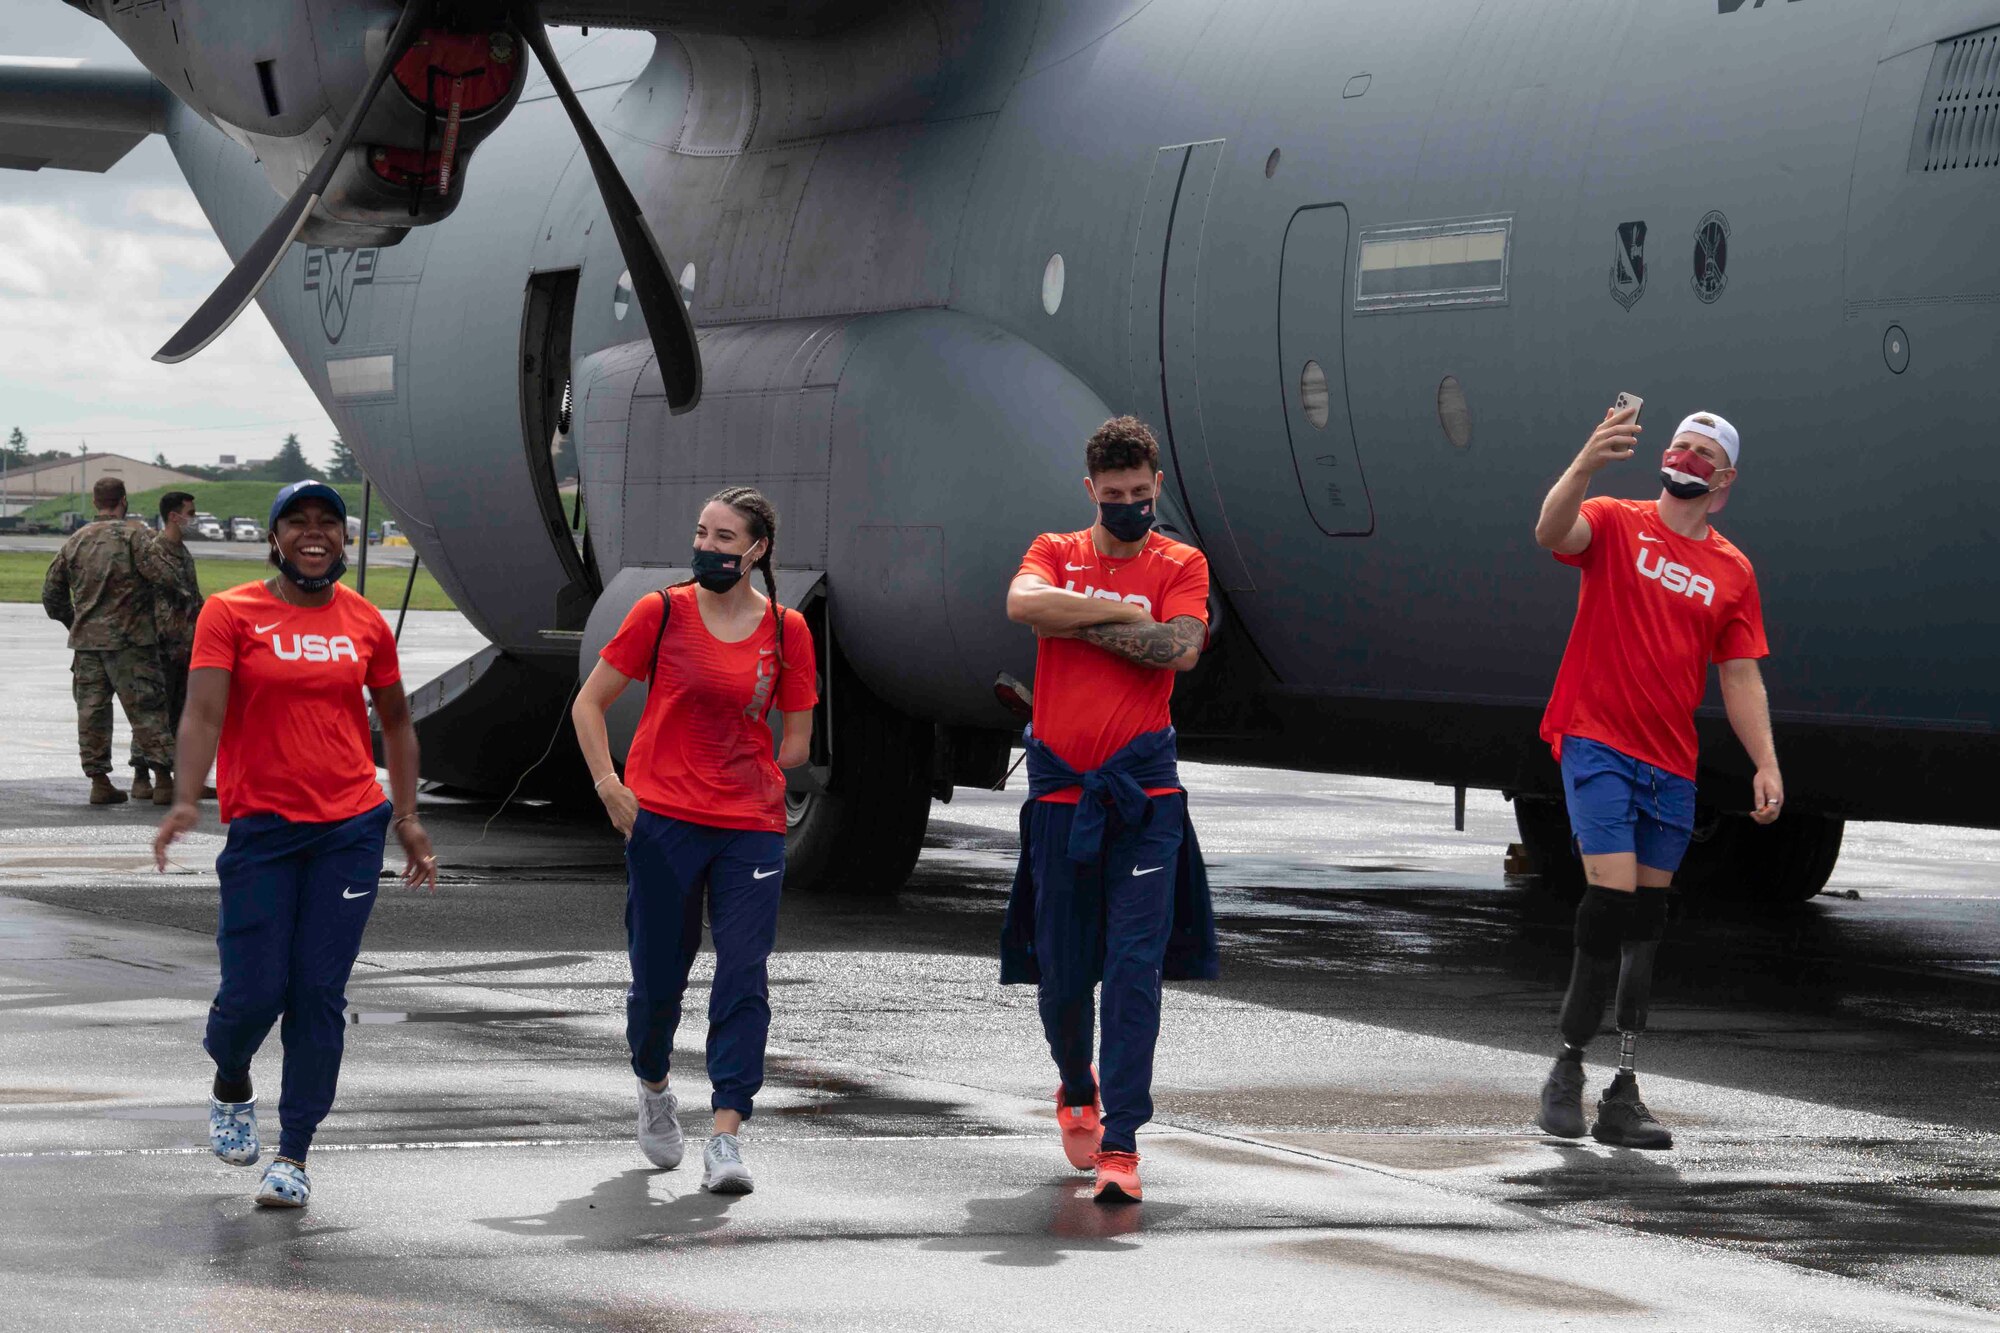 U.S. Paralympians pose in front of a C-130J Super Hercules at Yokota Air Base, Japan, Aug. 18, 2021, before competing in the 2020 Summer Paralympic games in Tokyo.